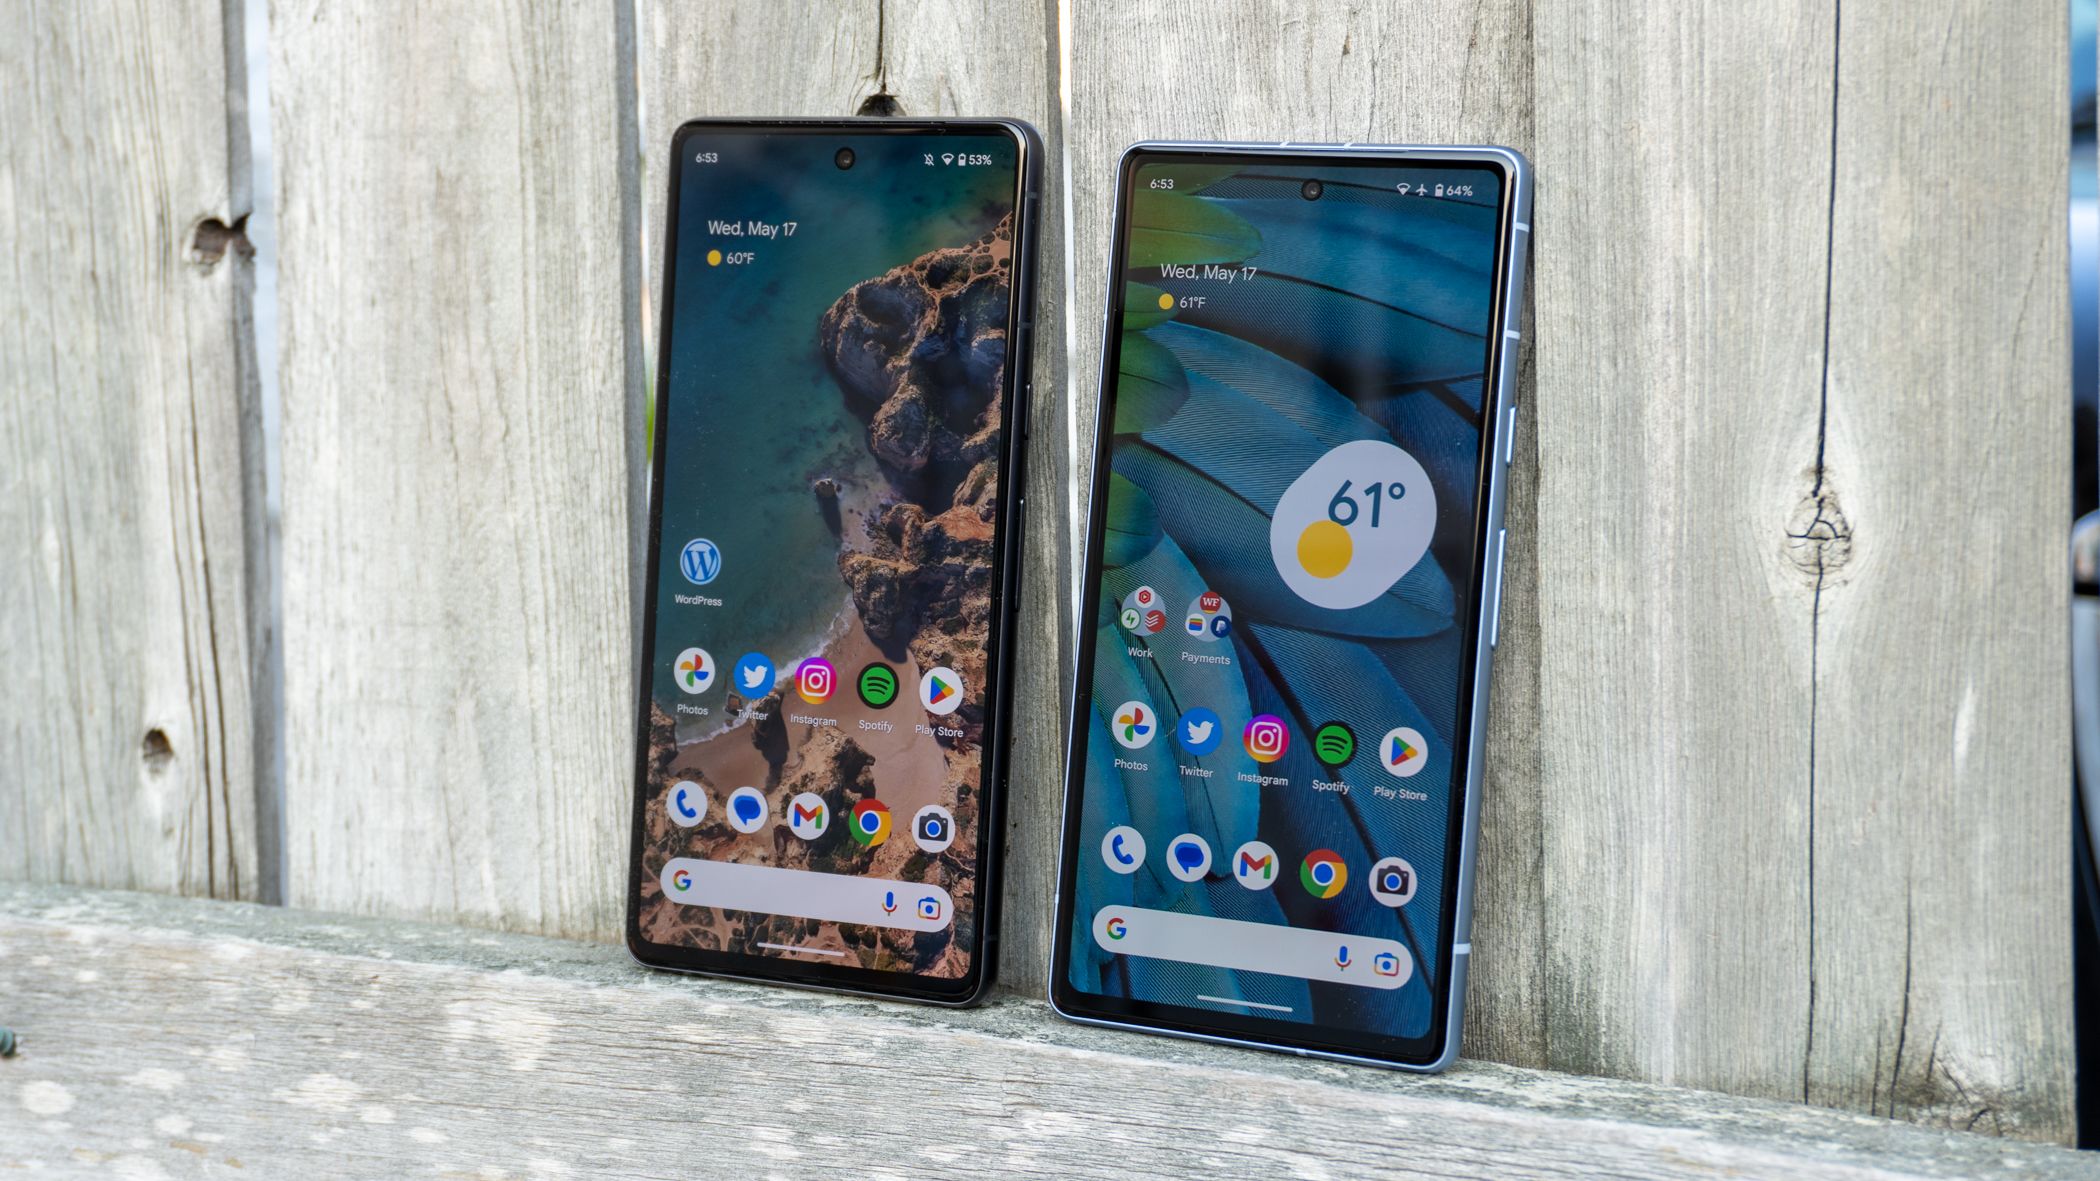 Google Pixel 7a Review: Pixel 7, Meet Your Replacement